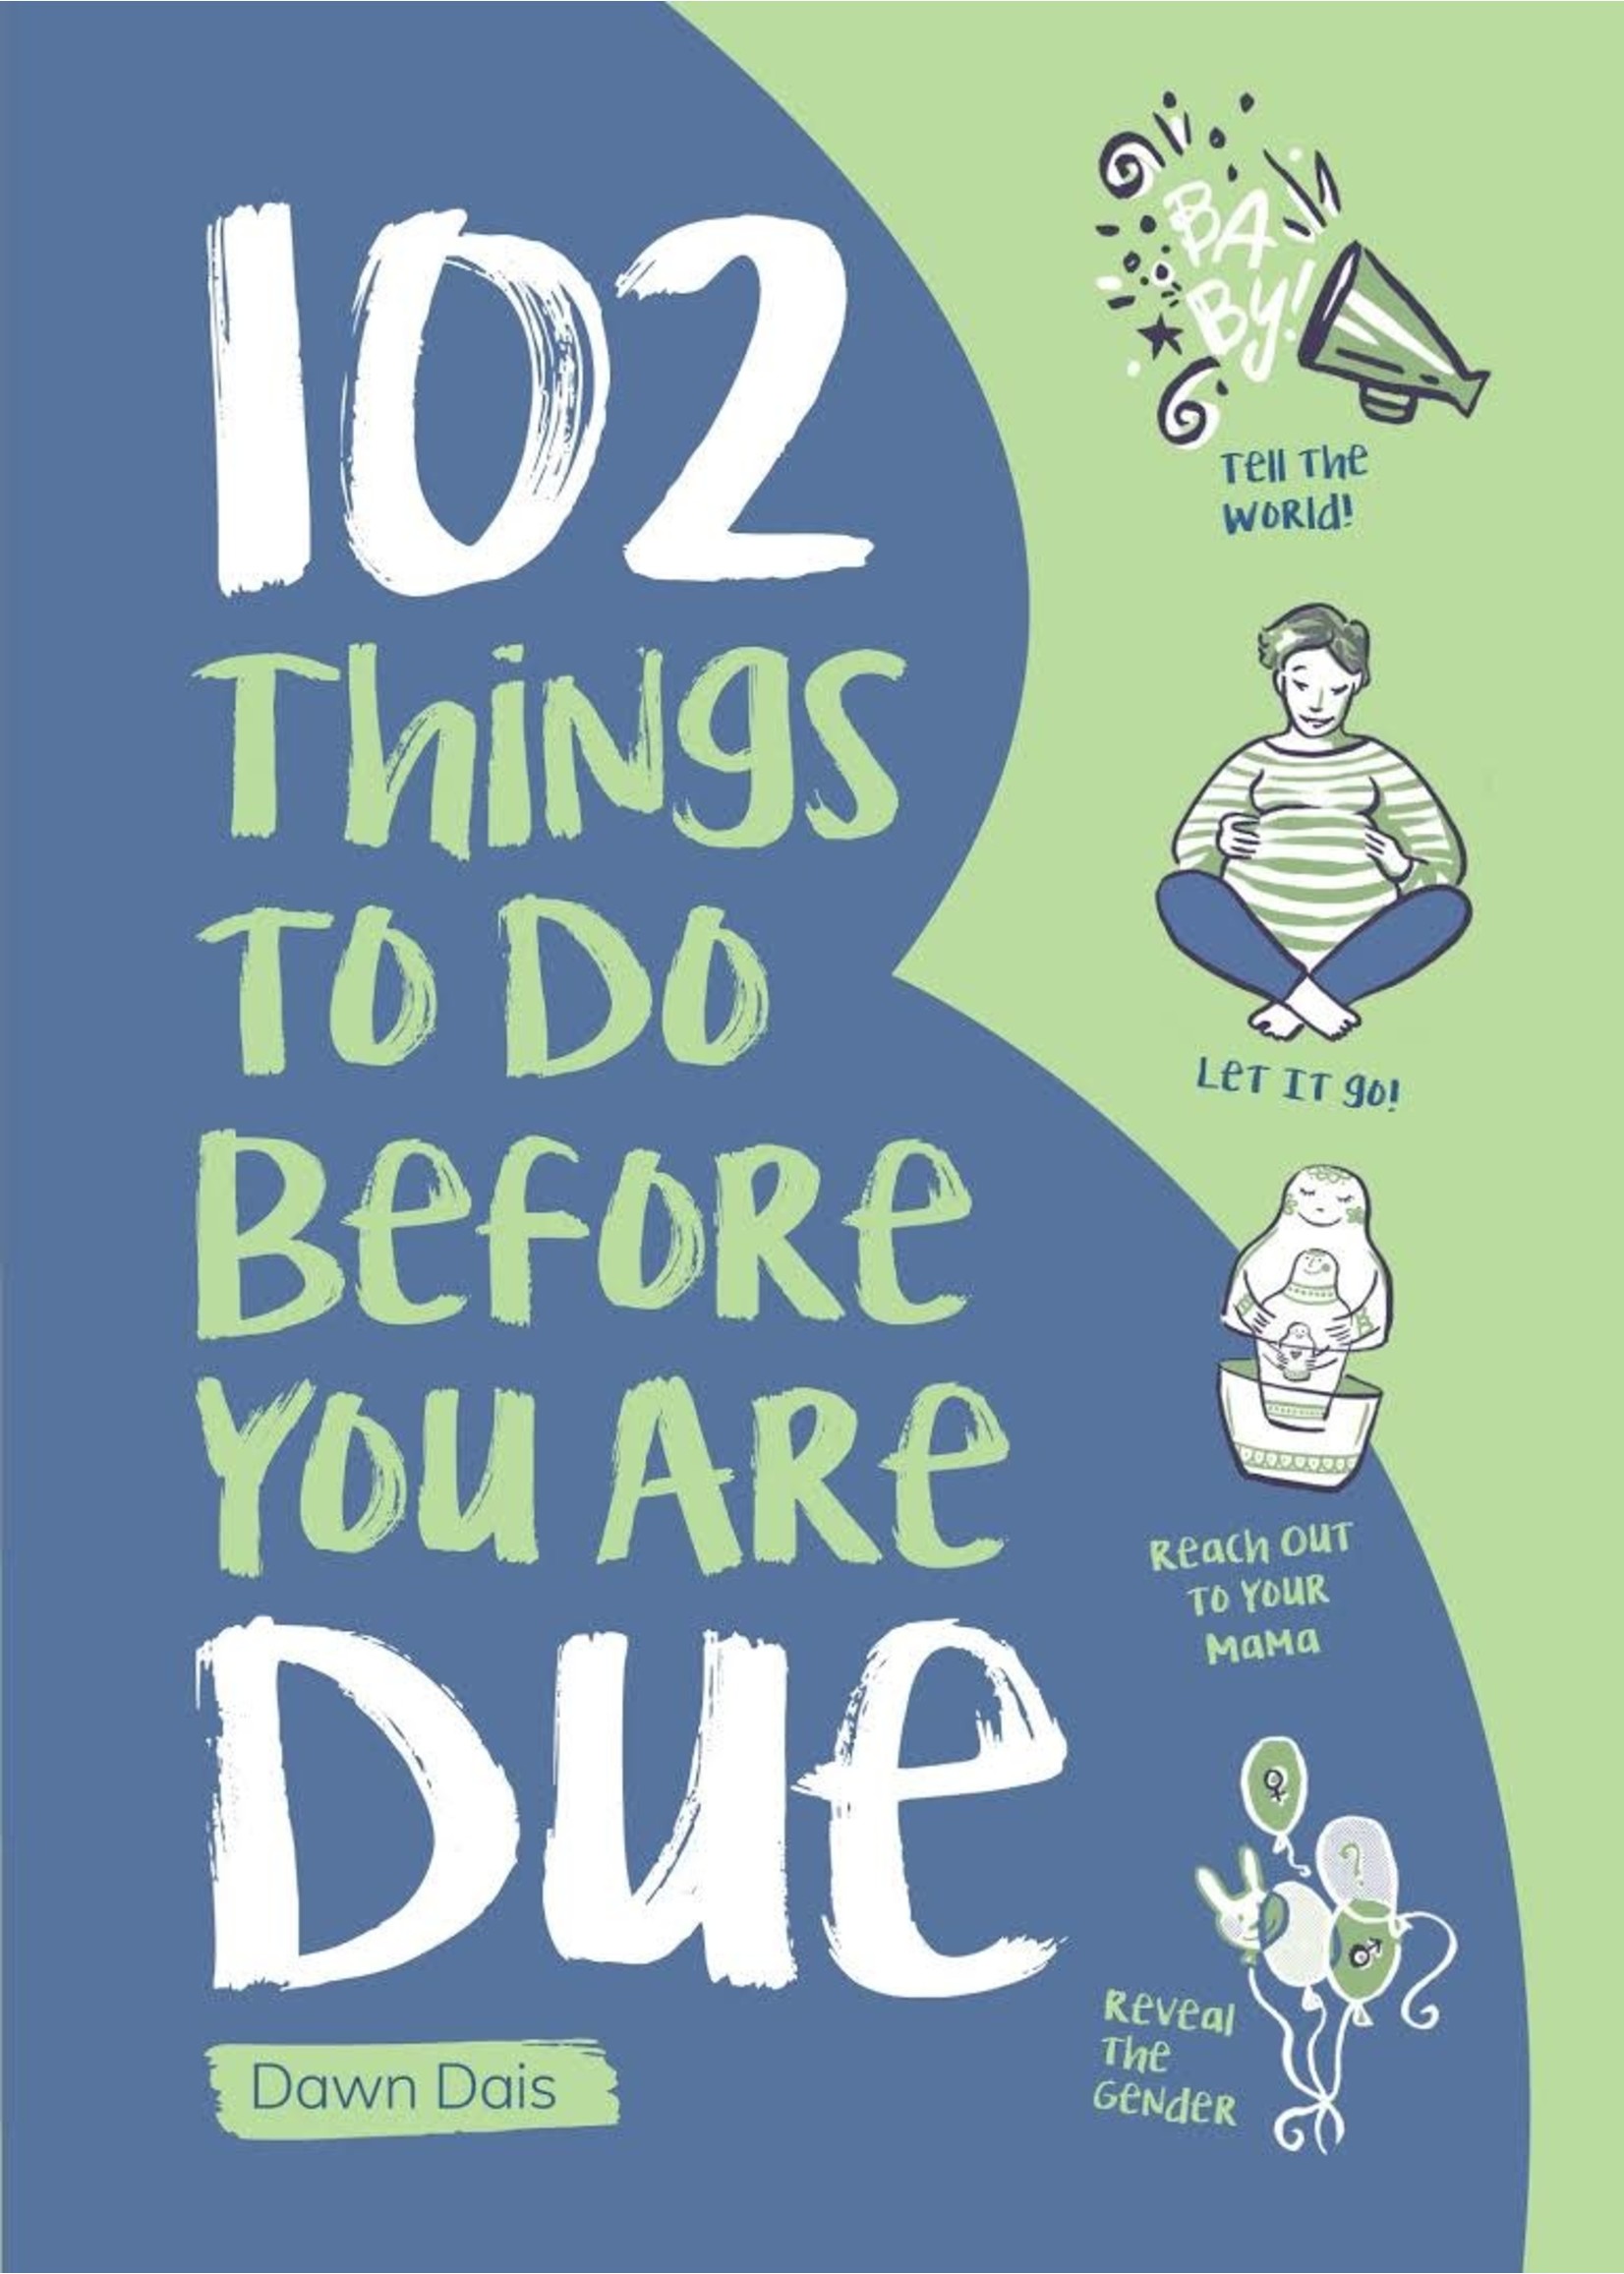 Book Depot 102 Things to Do Before your are Due